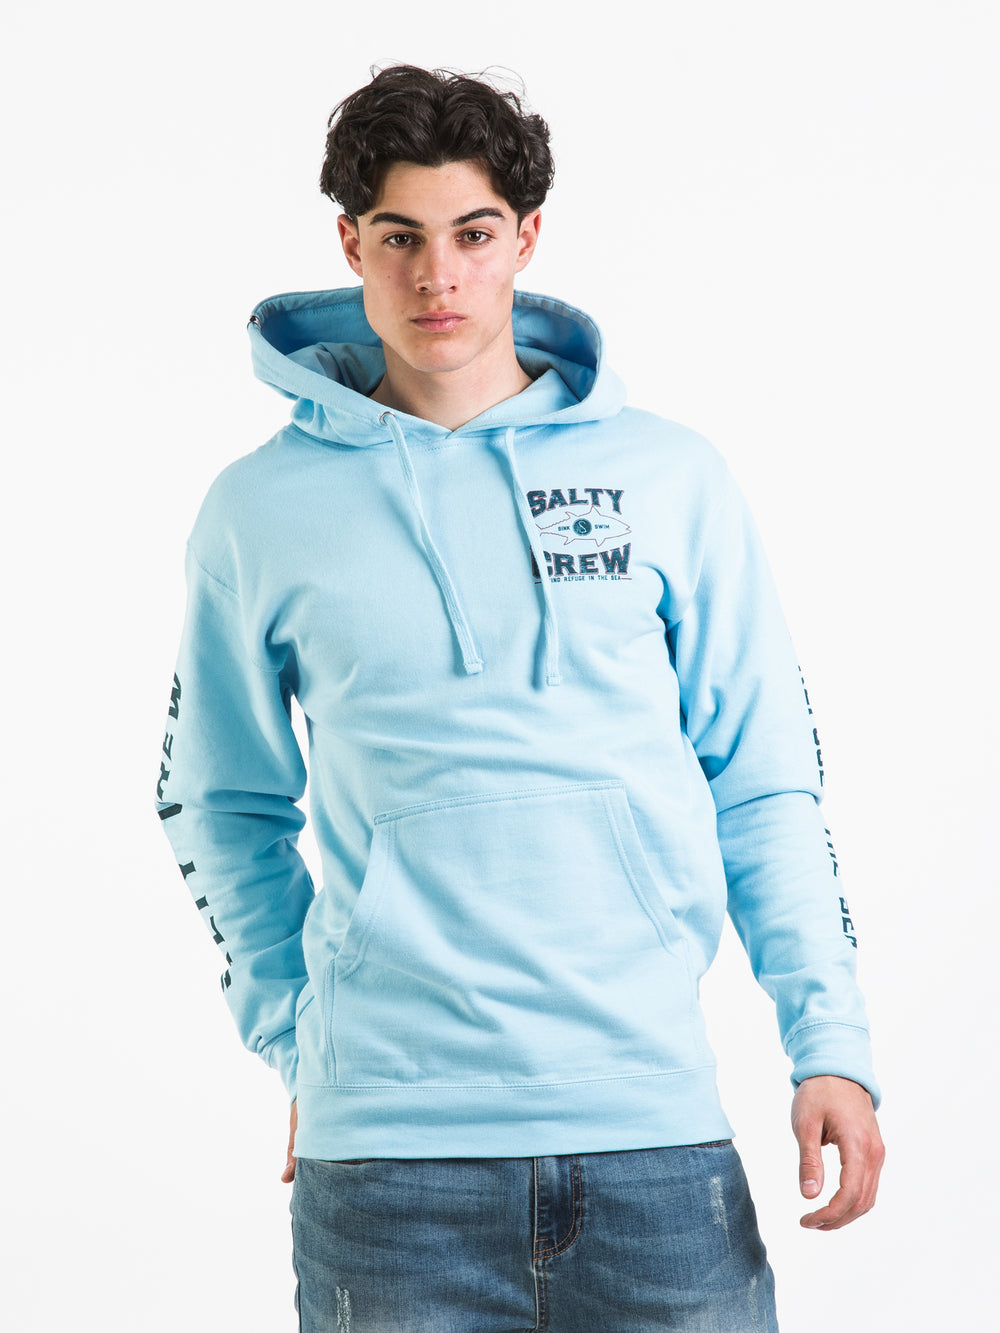 SALTY CREW TIGHT LINES PULL OVER HOODIE - CLEARANCE